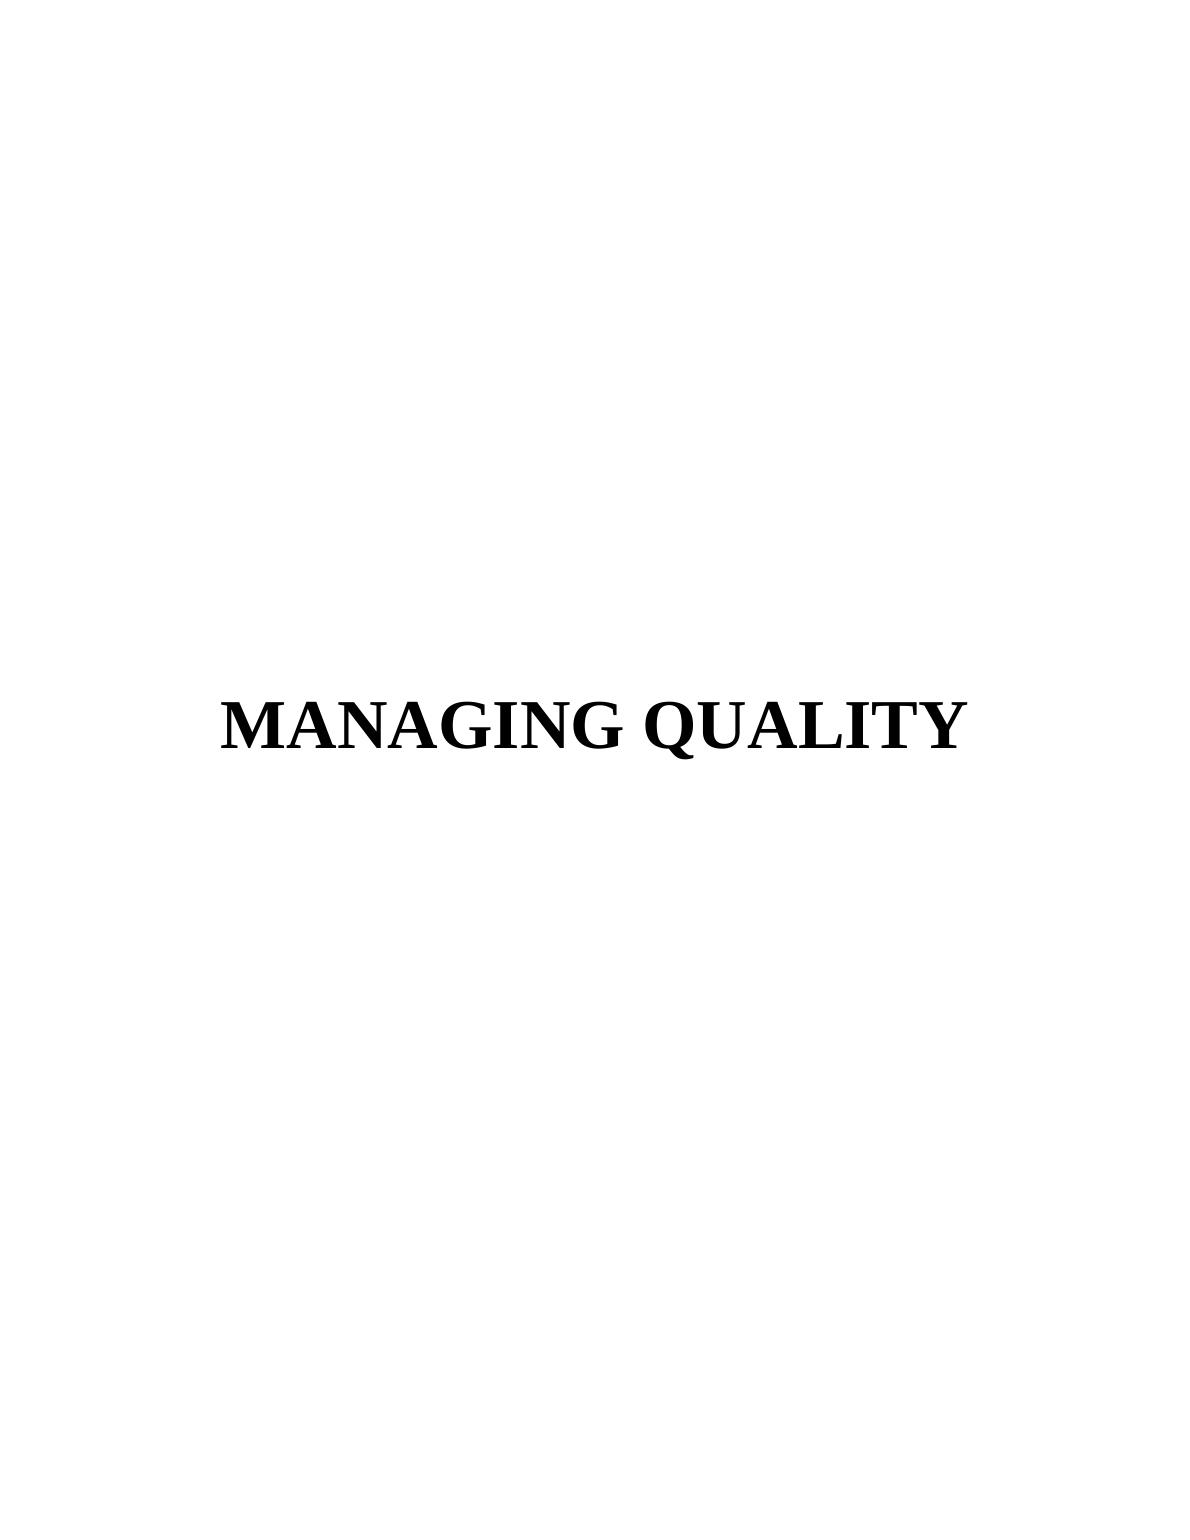 MANAGING QUALITY INTRODUCTION 1 Task 11 P(1.1) Stakeholders connected with health and social care services_1